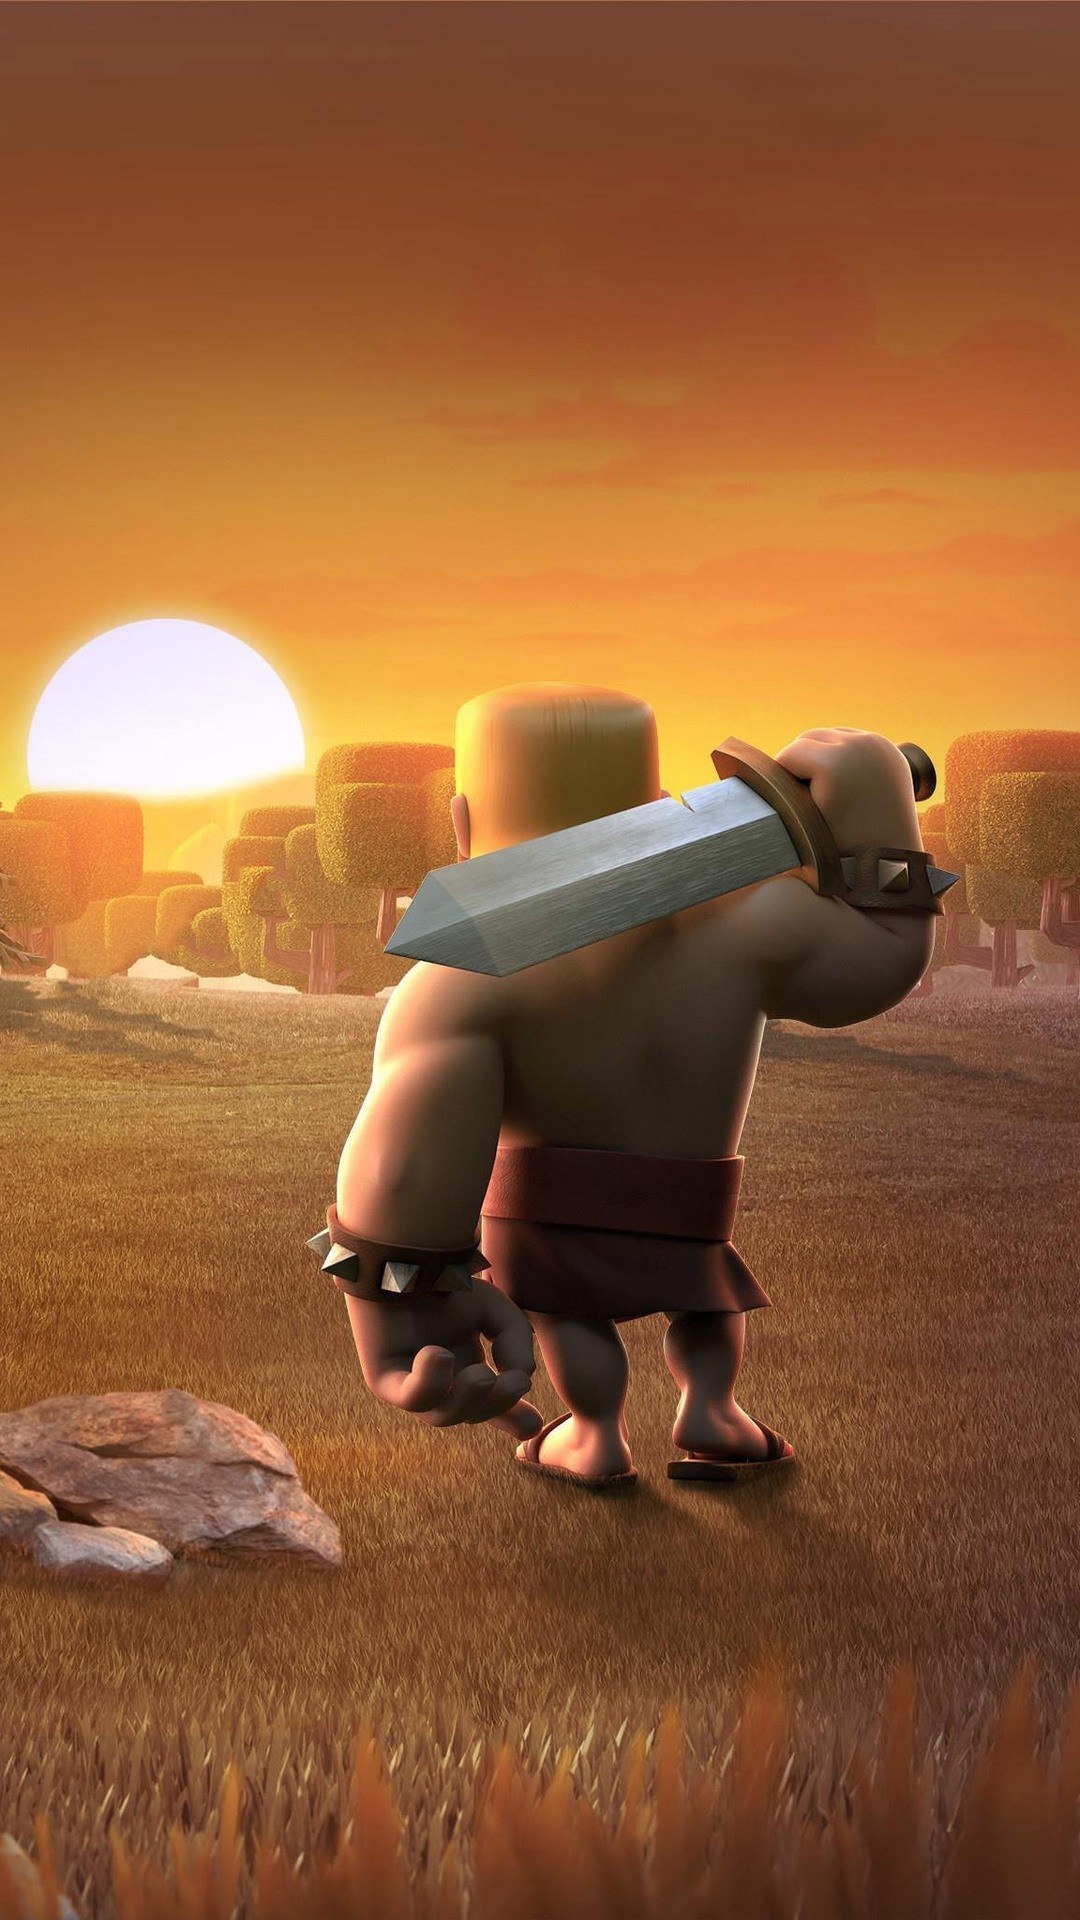 Clash of Clans: The Barbarian, A male kilt-clad Scottish warrior with an angry, battle-ready expression. 1080x1920 Full HD Wallpaper.